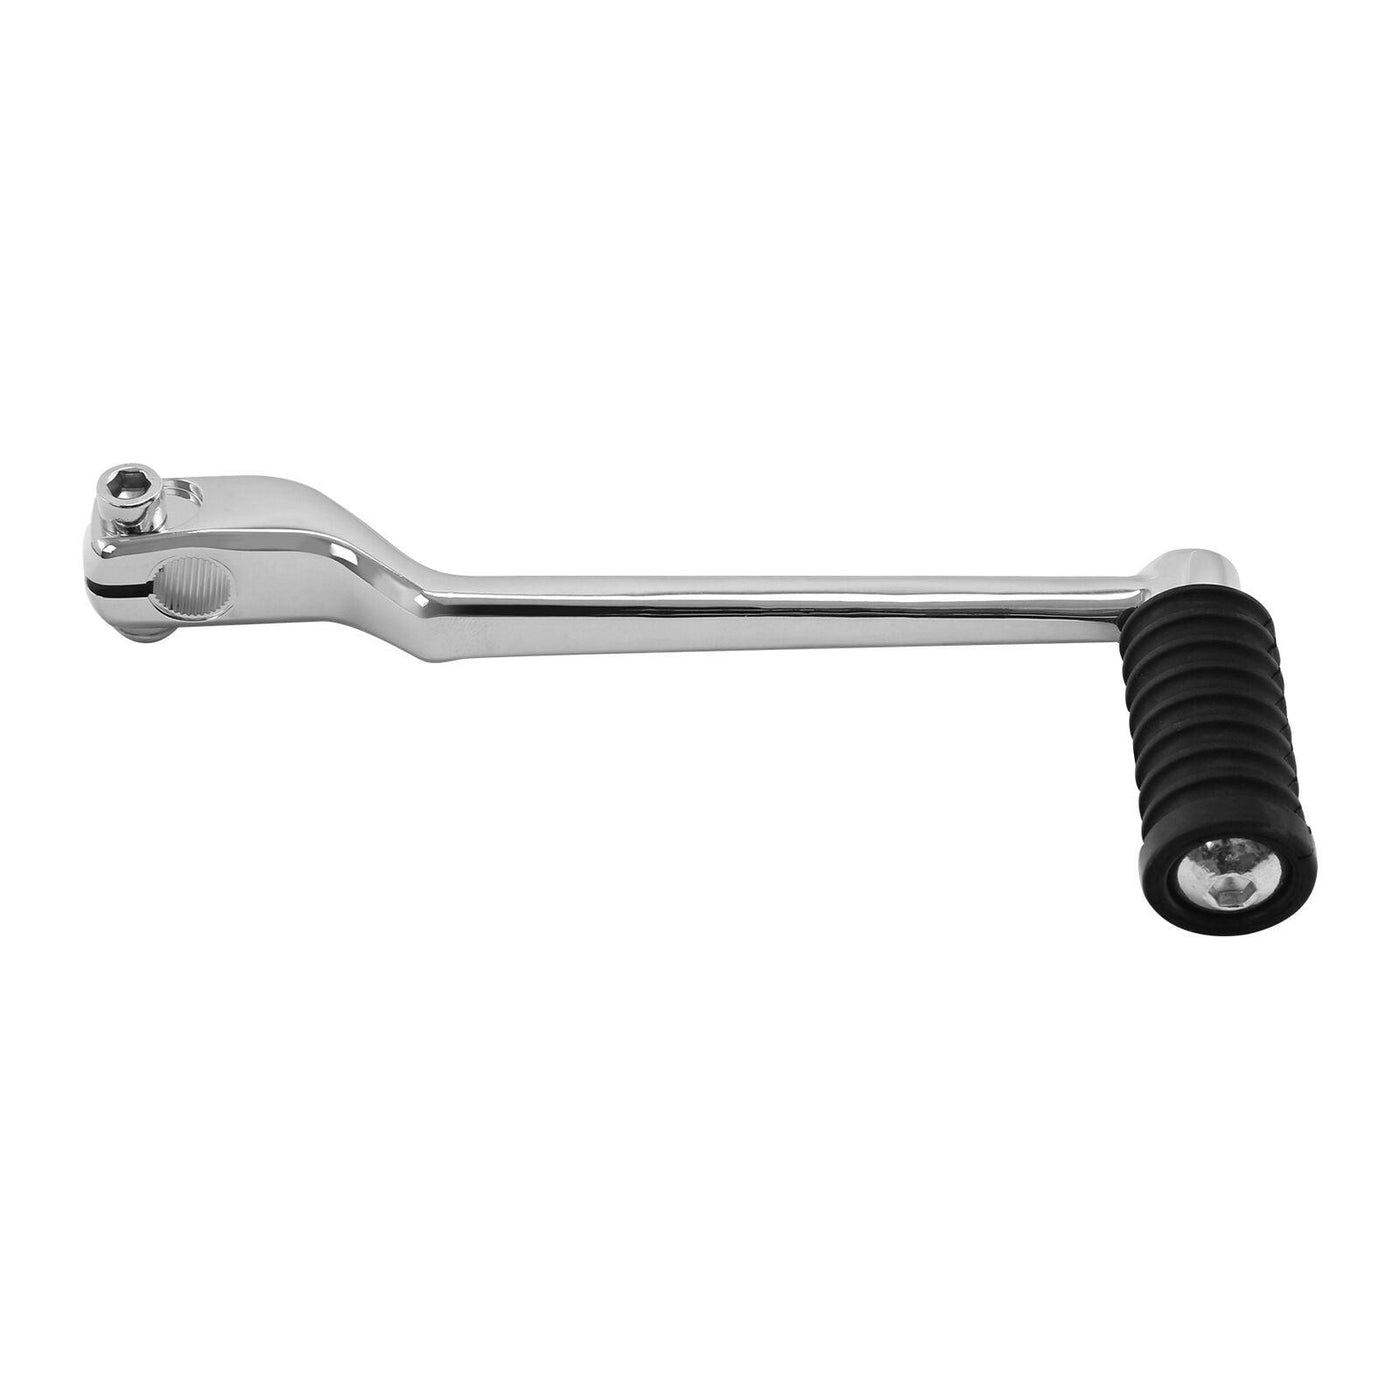 Chrome Black Rear Shift Shifter Lever Pedal Peg Fit For Harley Touring 1988-up - Moto Life Products